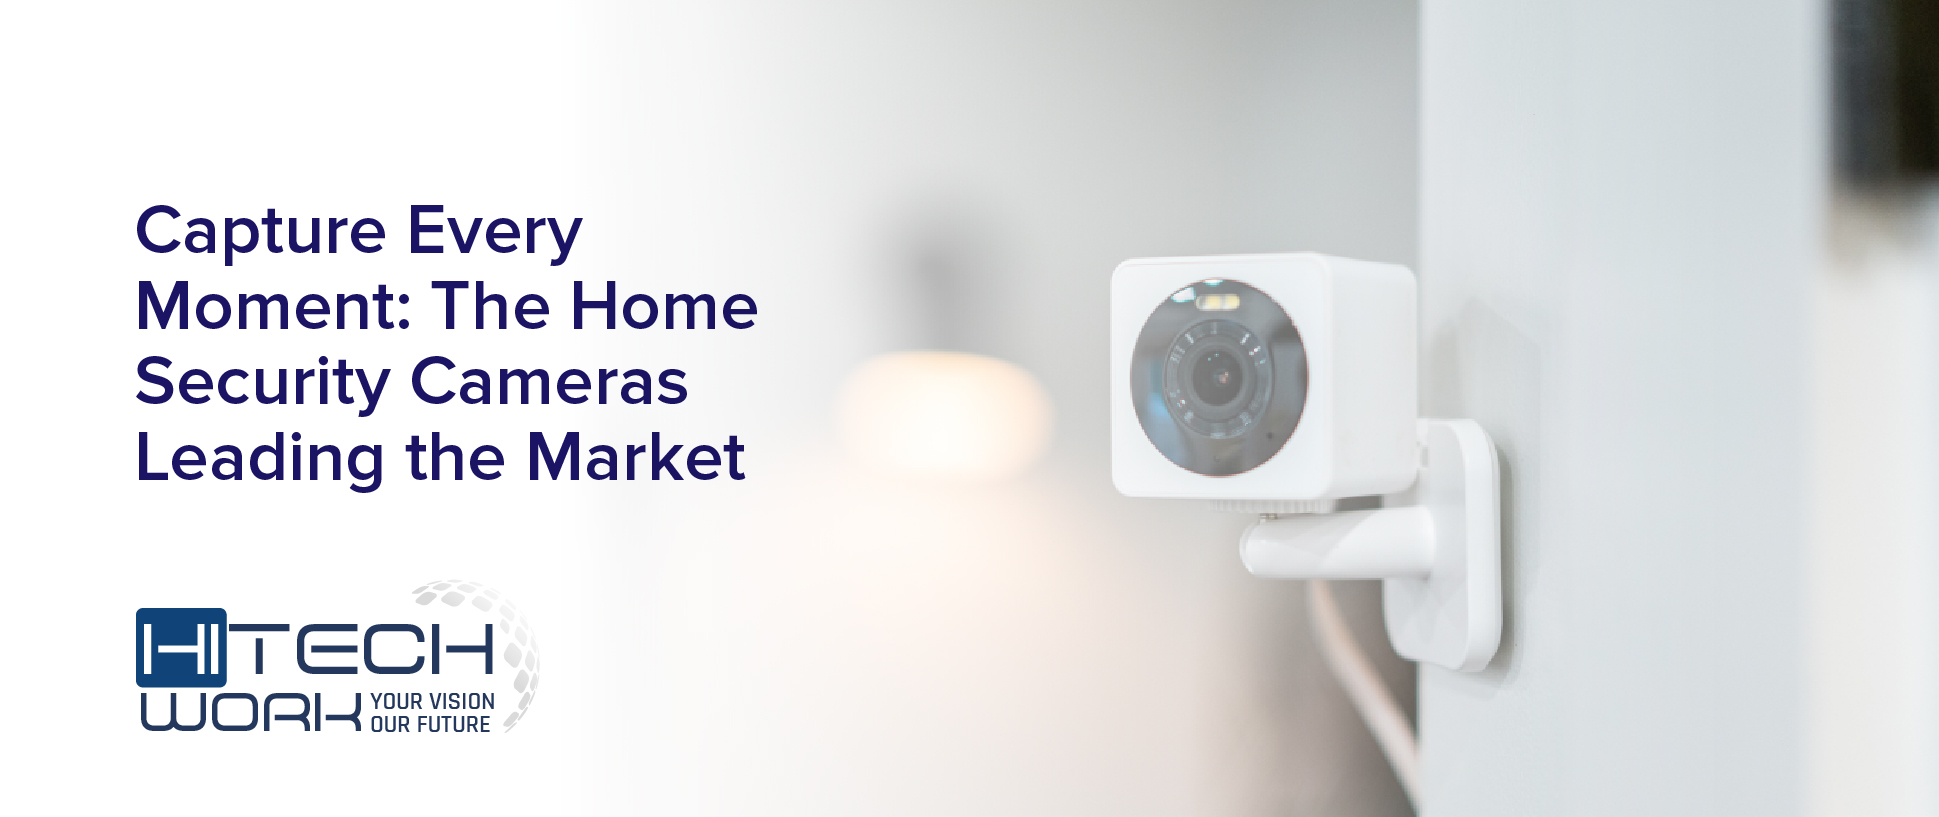 Security Cameras Leading the Market